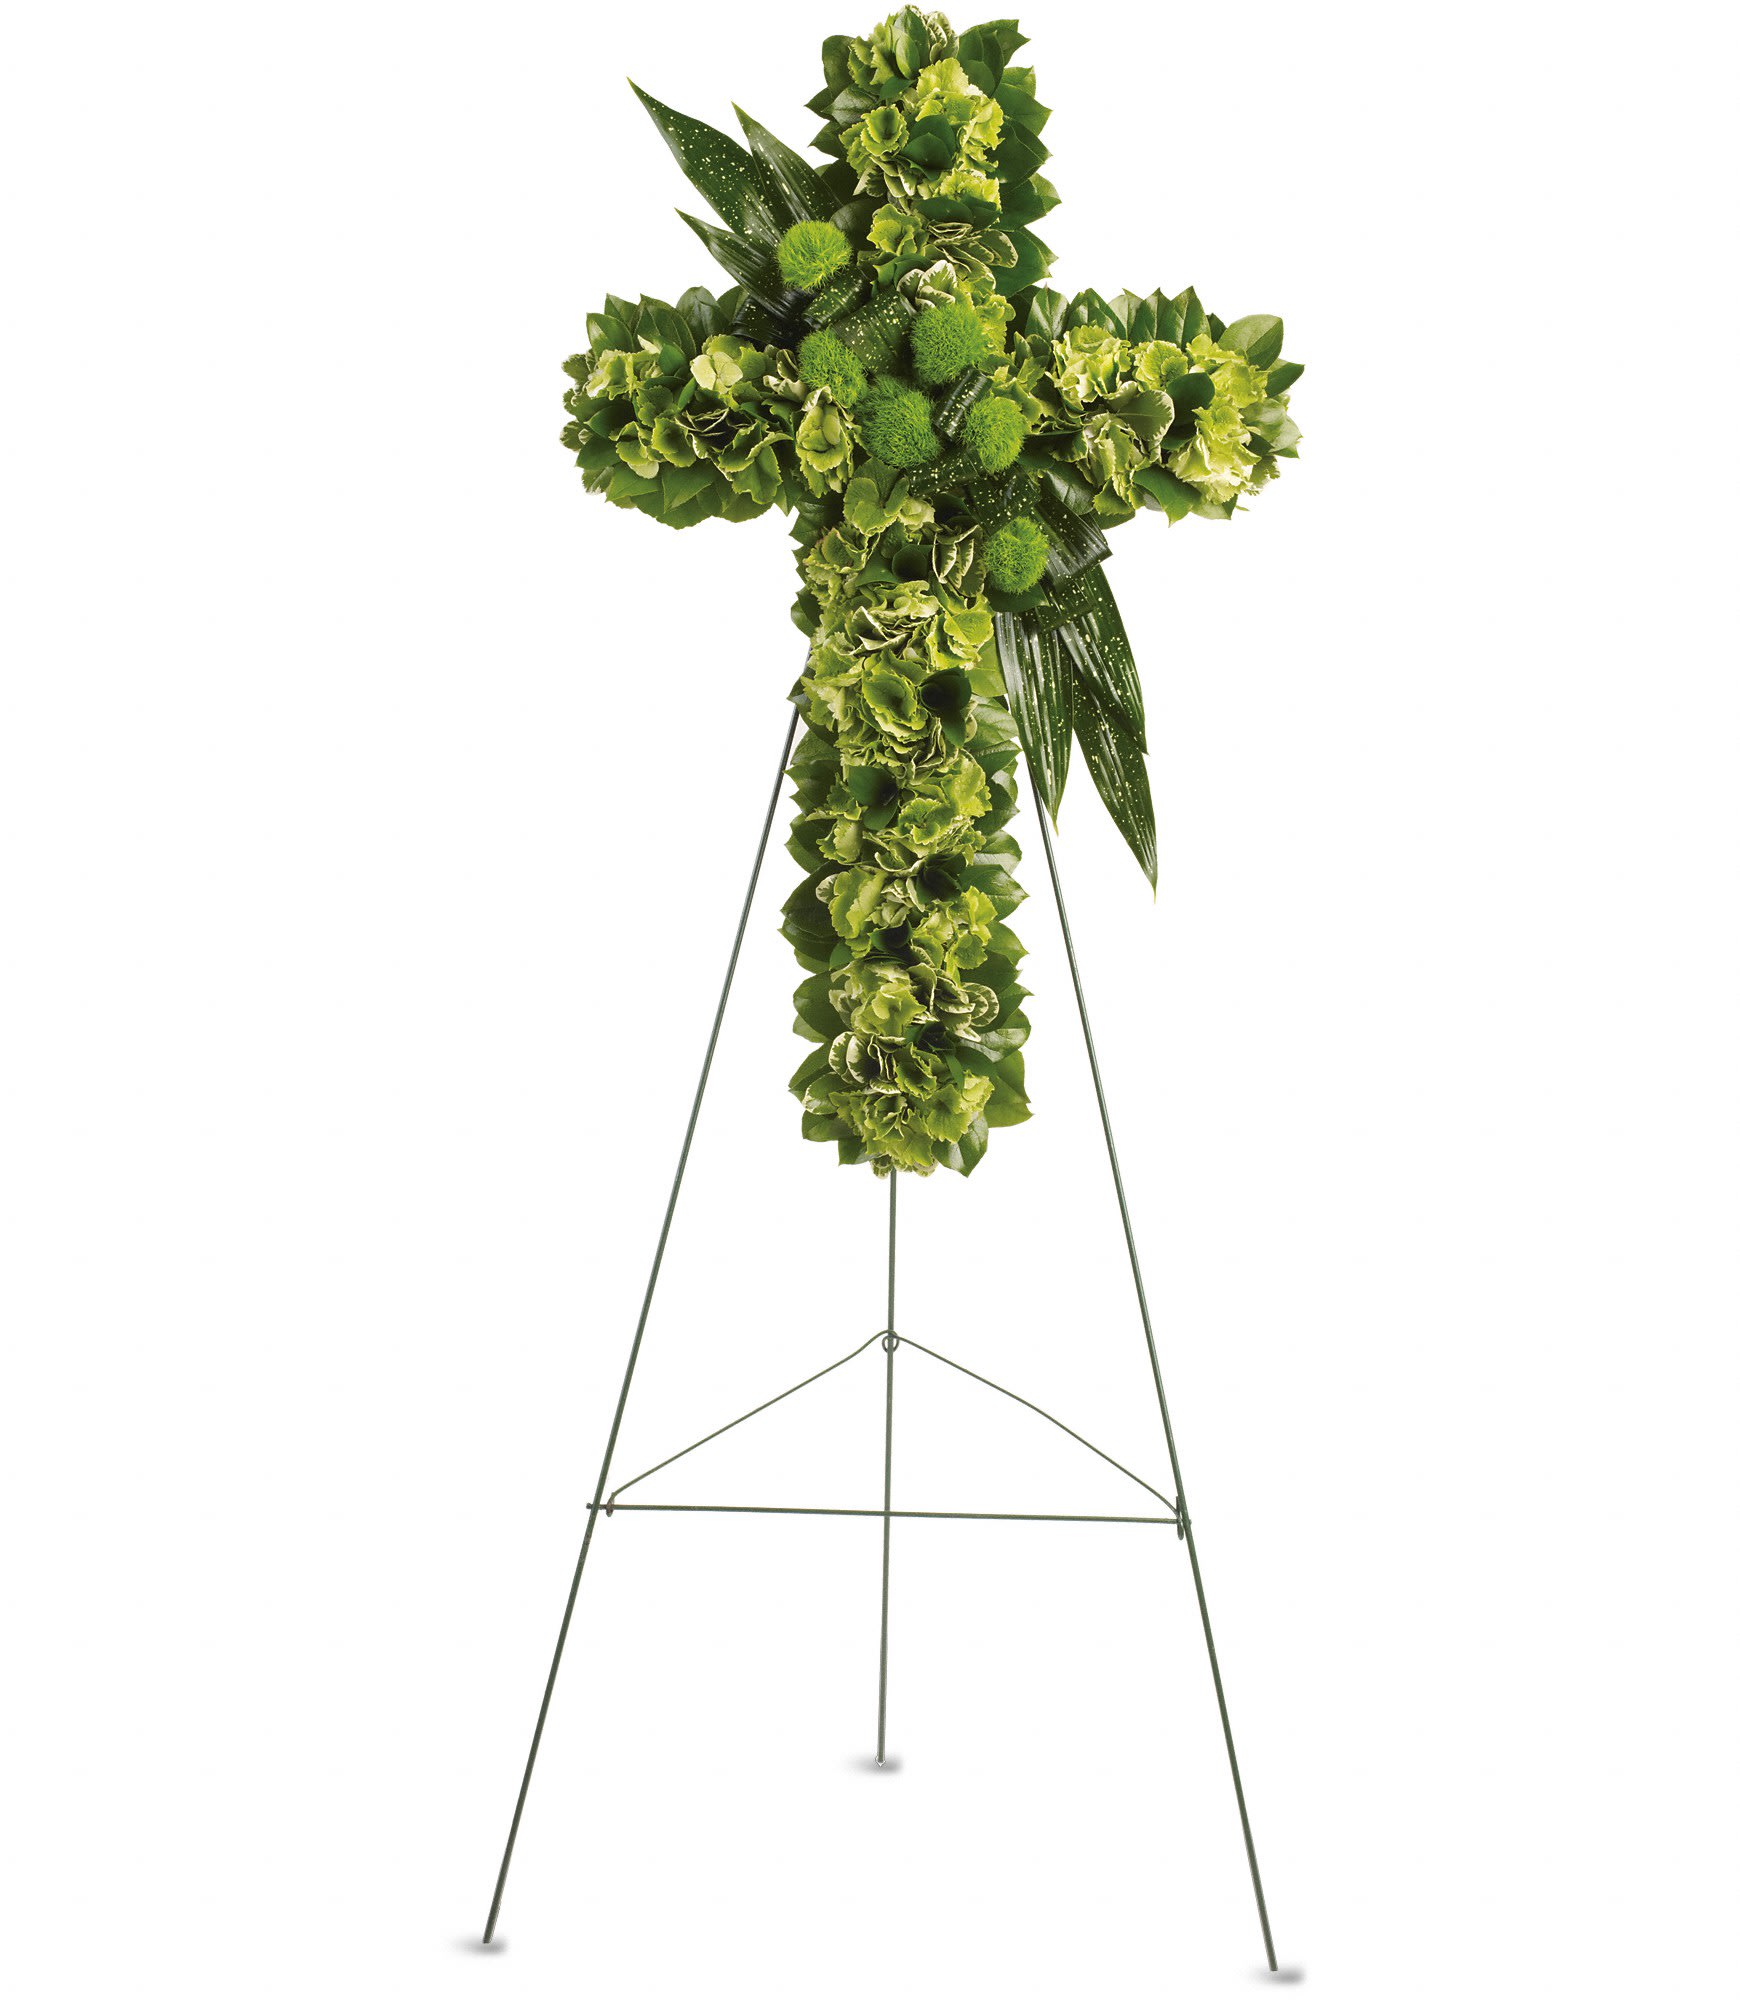 Garden Cross - A spiritual tribute for the religious service, this lovely cross made of green hydrangea, green dianthus and other favorites symbolizes the hope for eternal life. T269-2A